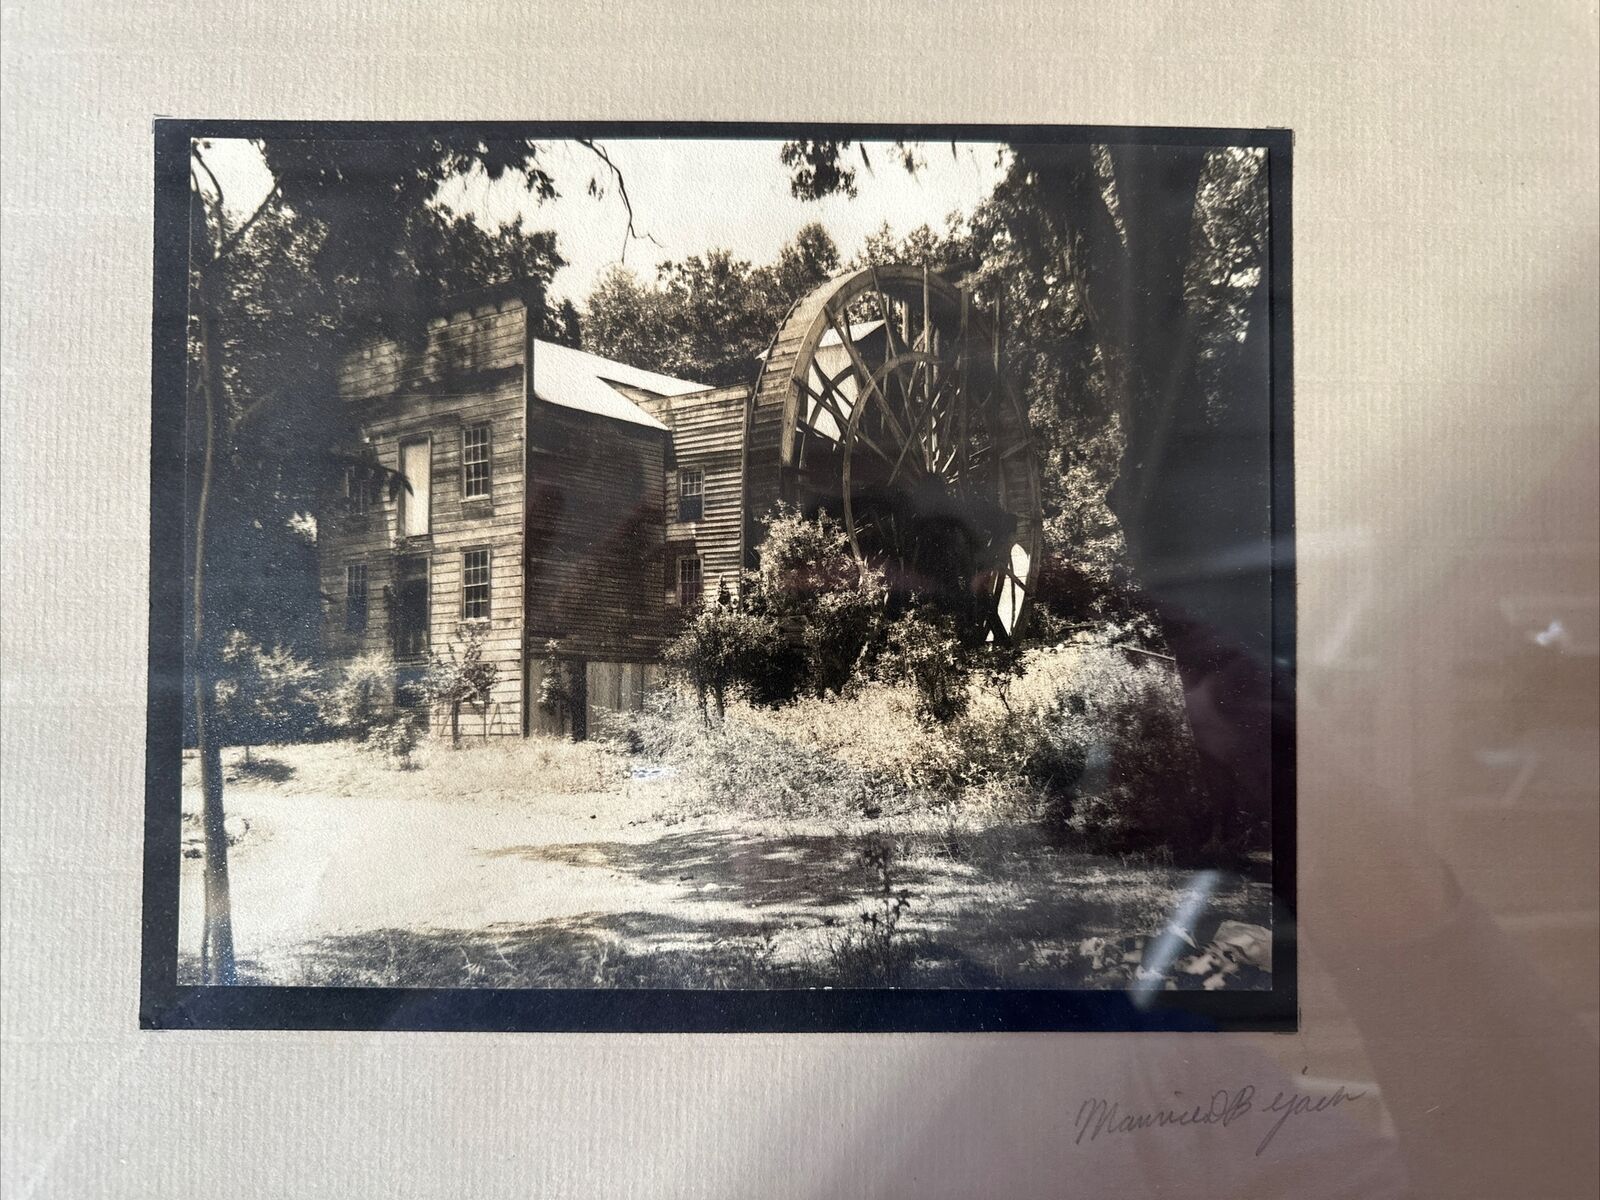 Vintage Photograph By Maurice Bejach : The Old Bale Mill Near St. Helena CA 1930